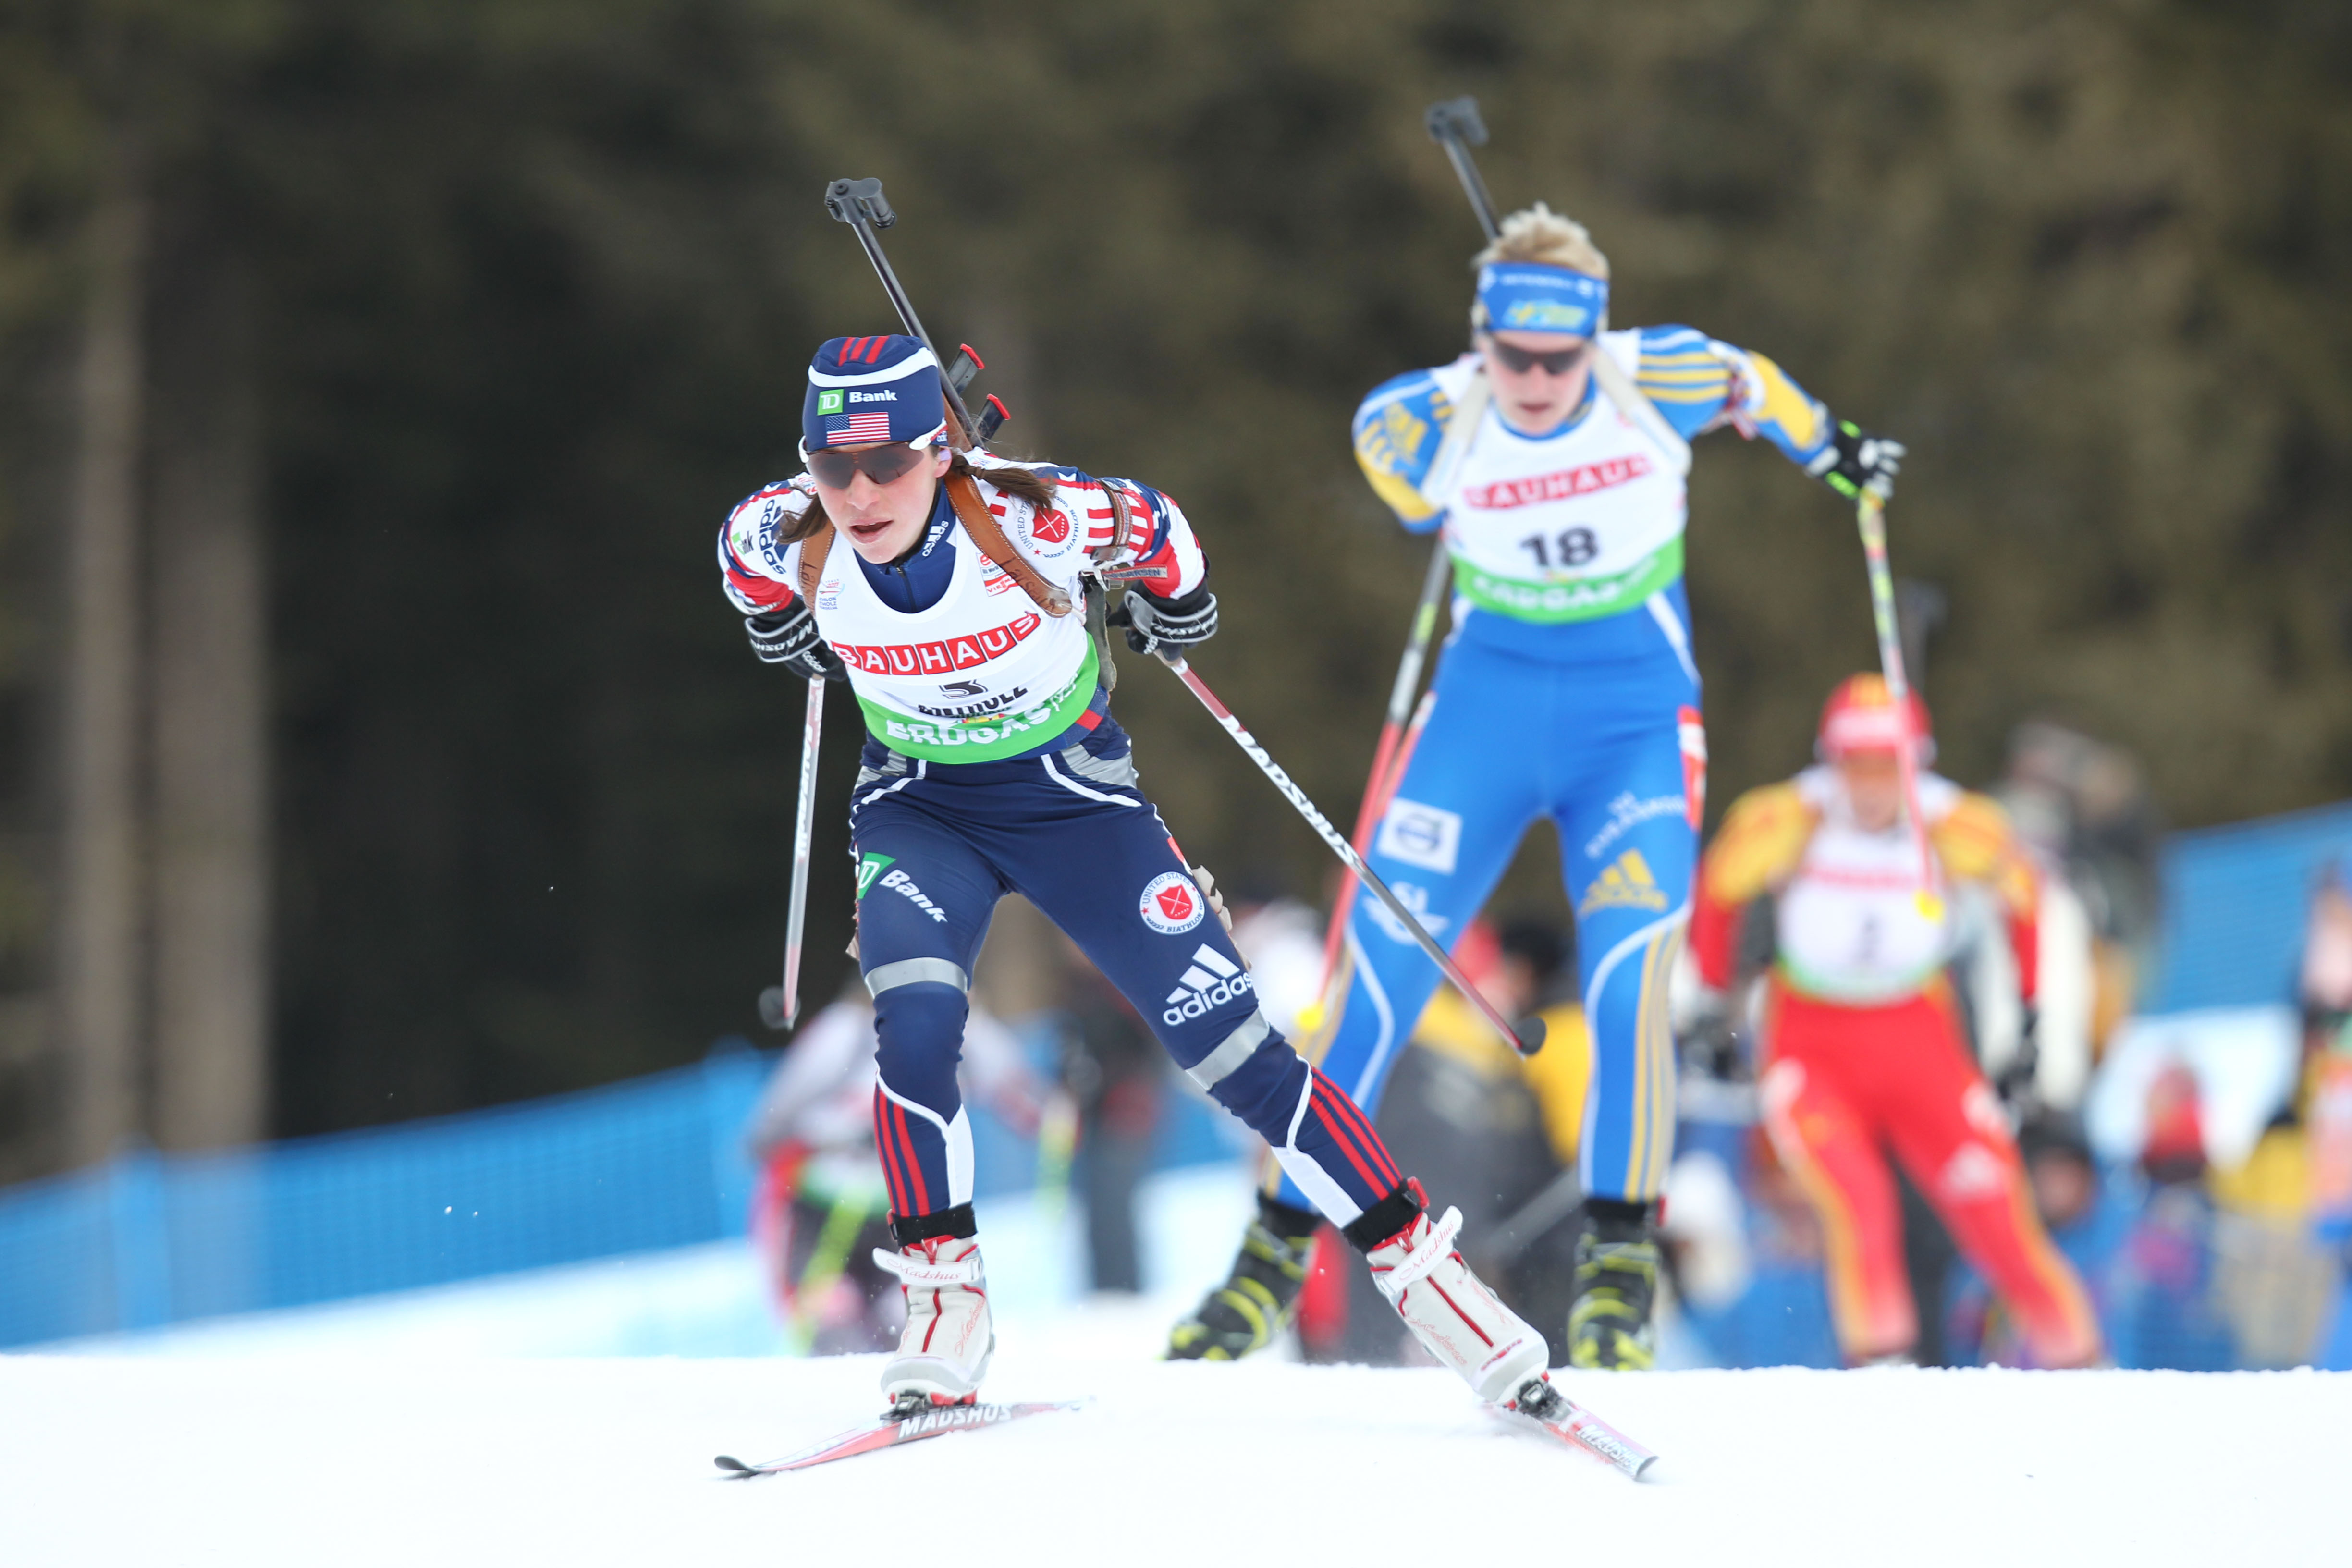 U.S. Women Strong in Last Sprint of World Cup Period 2; Berger Picks Up Third Consecutive Win